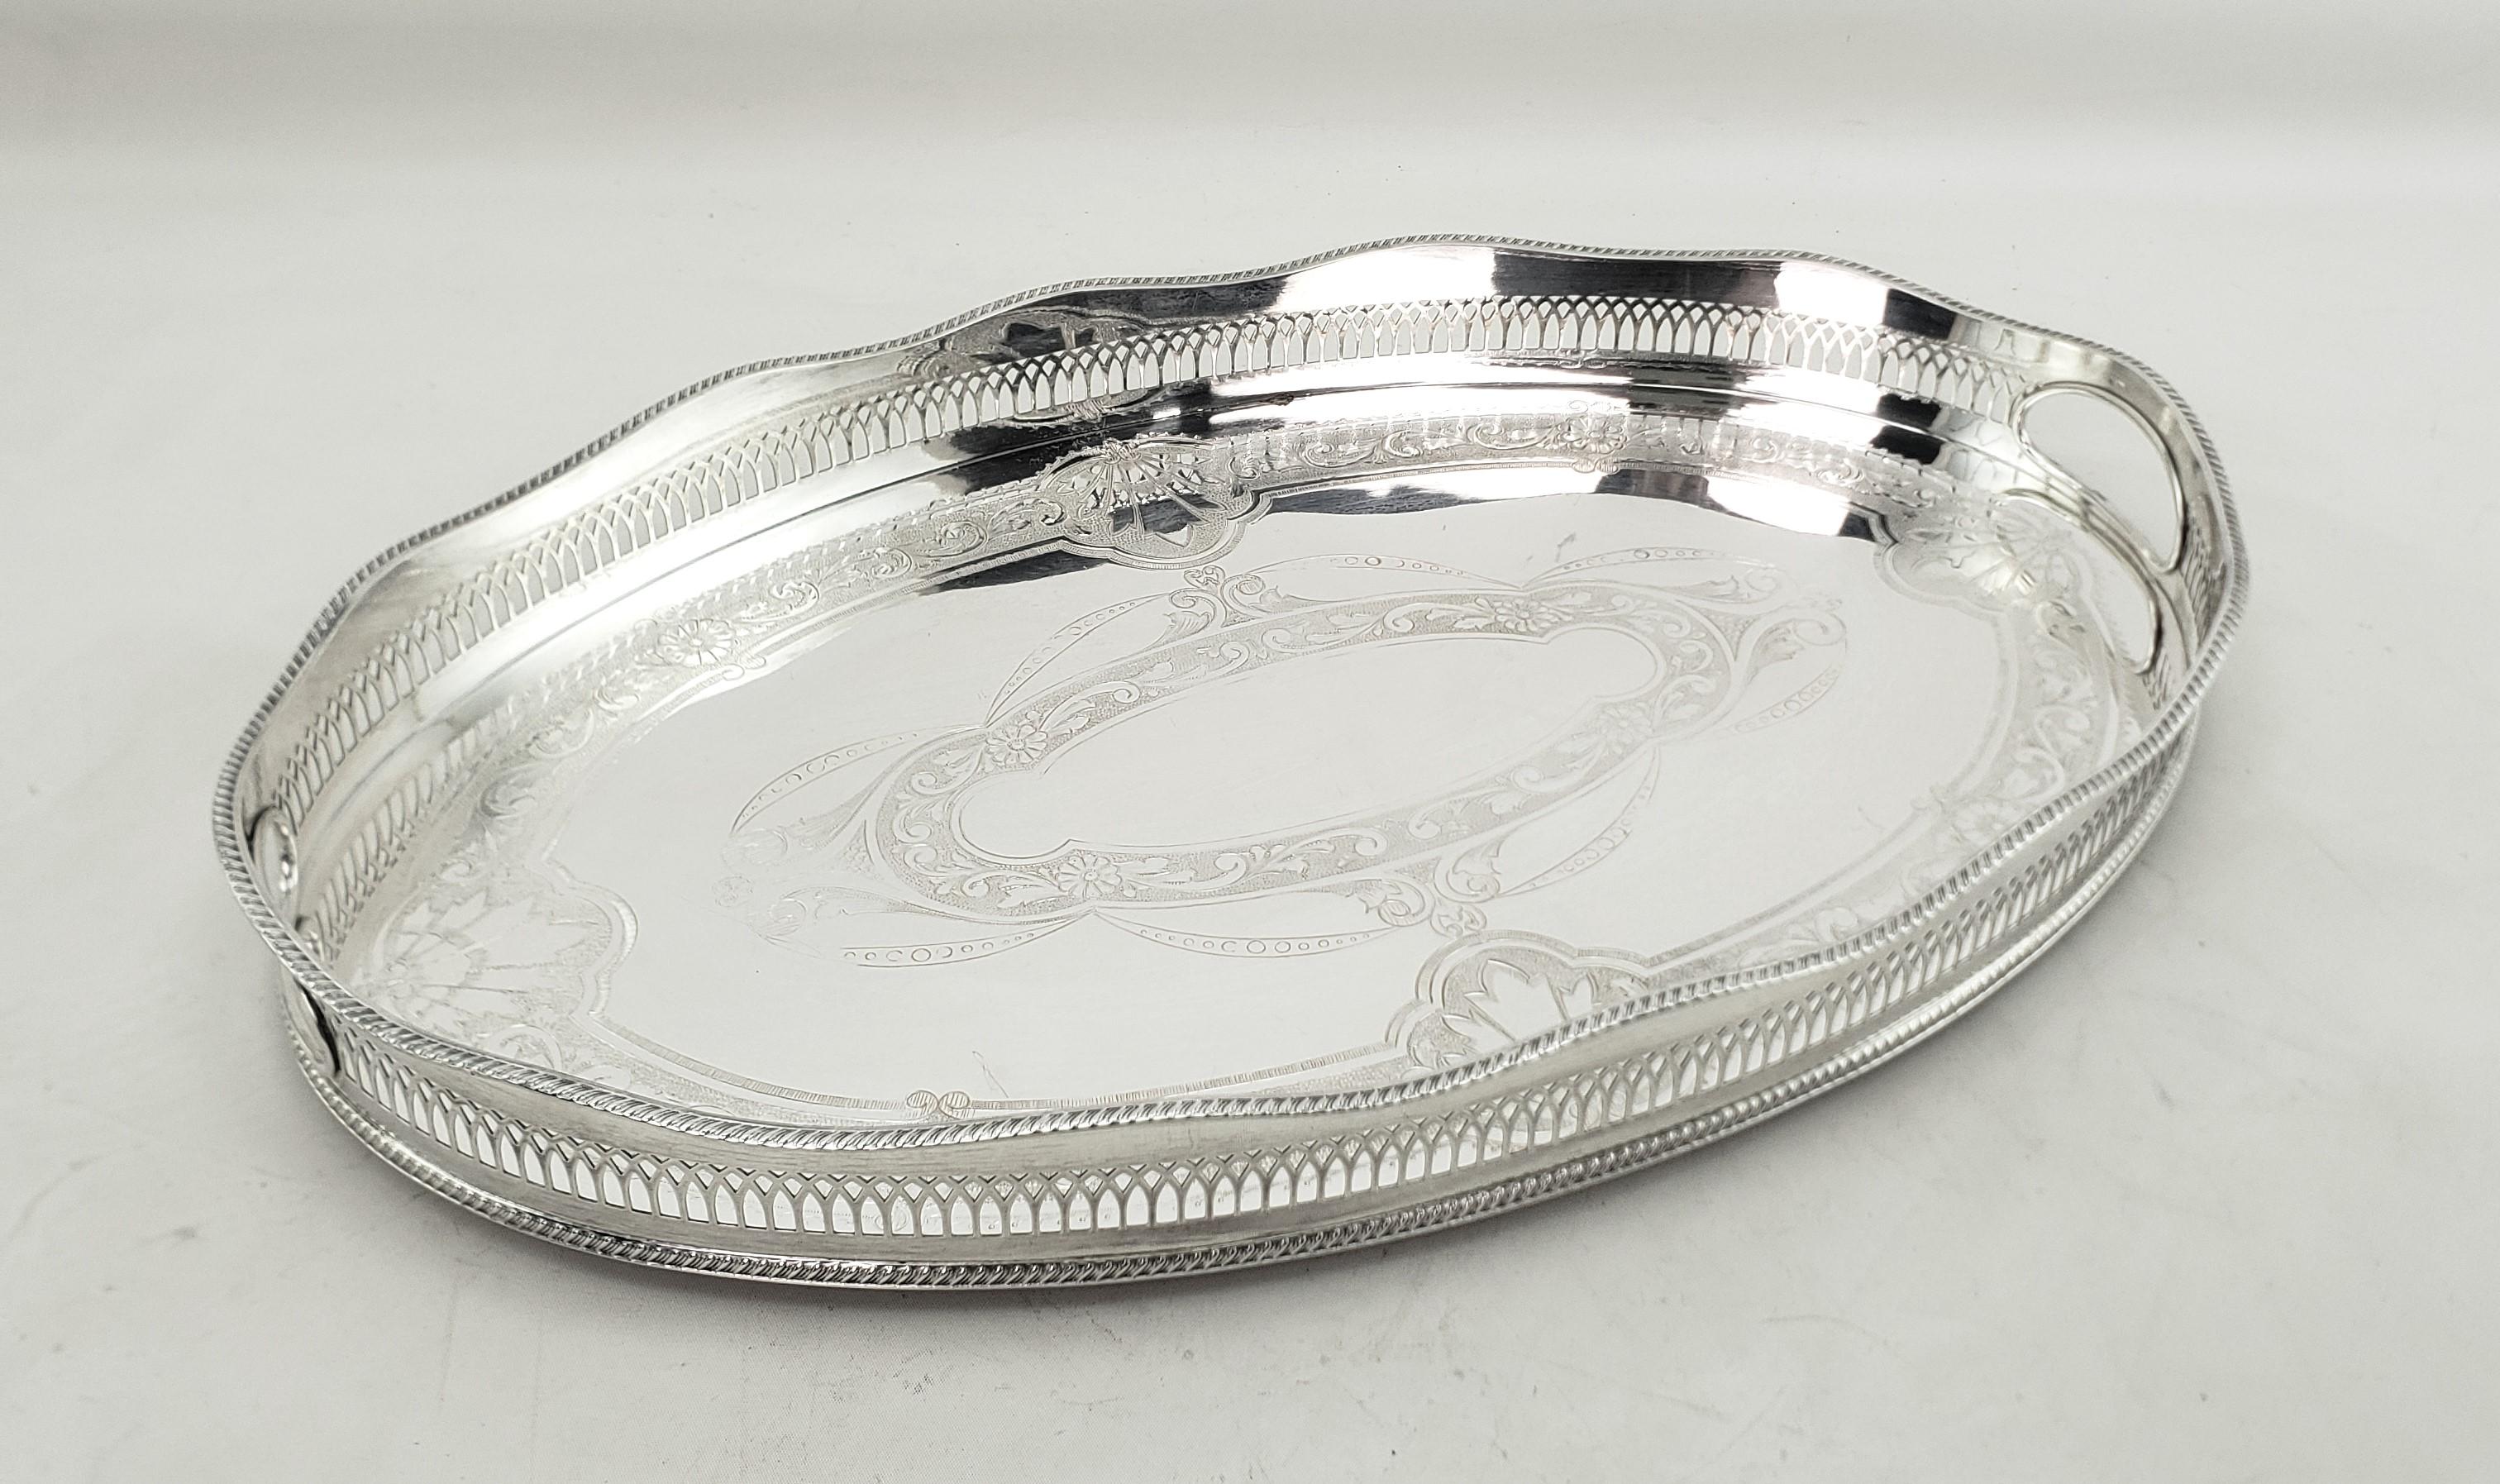 This antique styled serving tray was made by the Cavendish Plating Company of England and dates to approximately 1960 and done in an Edwardian style. The tray is composed of silver plate over copper and has a high pierced gallery with inset handles.